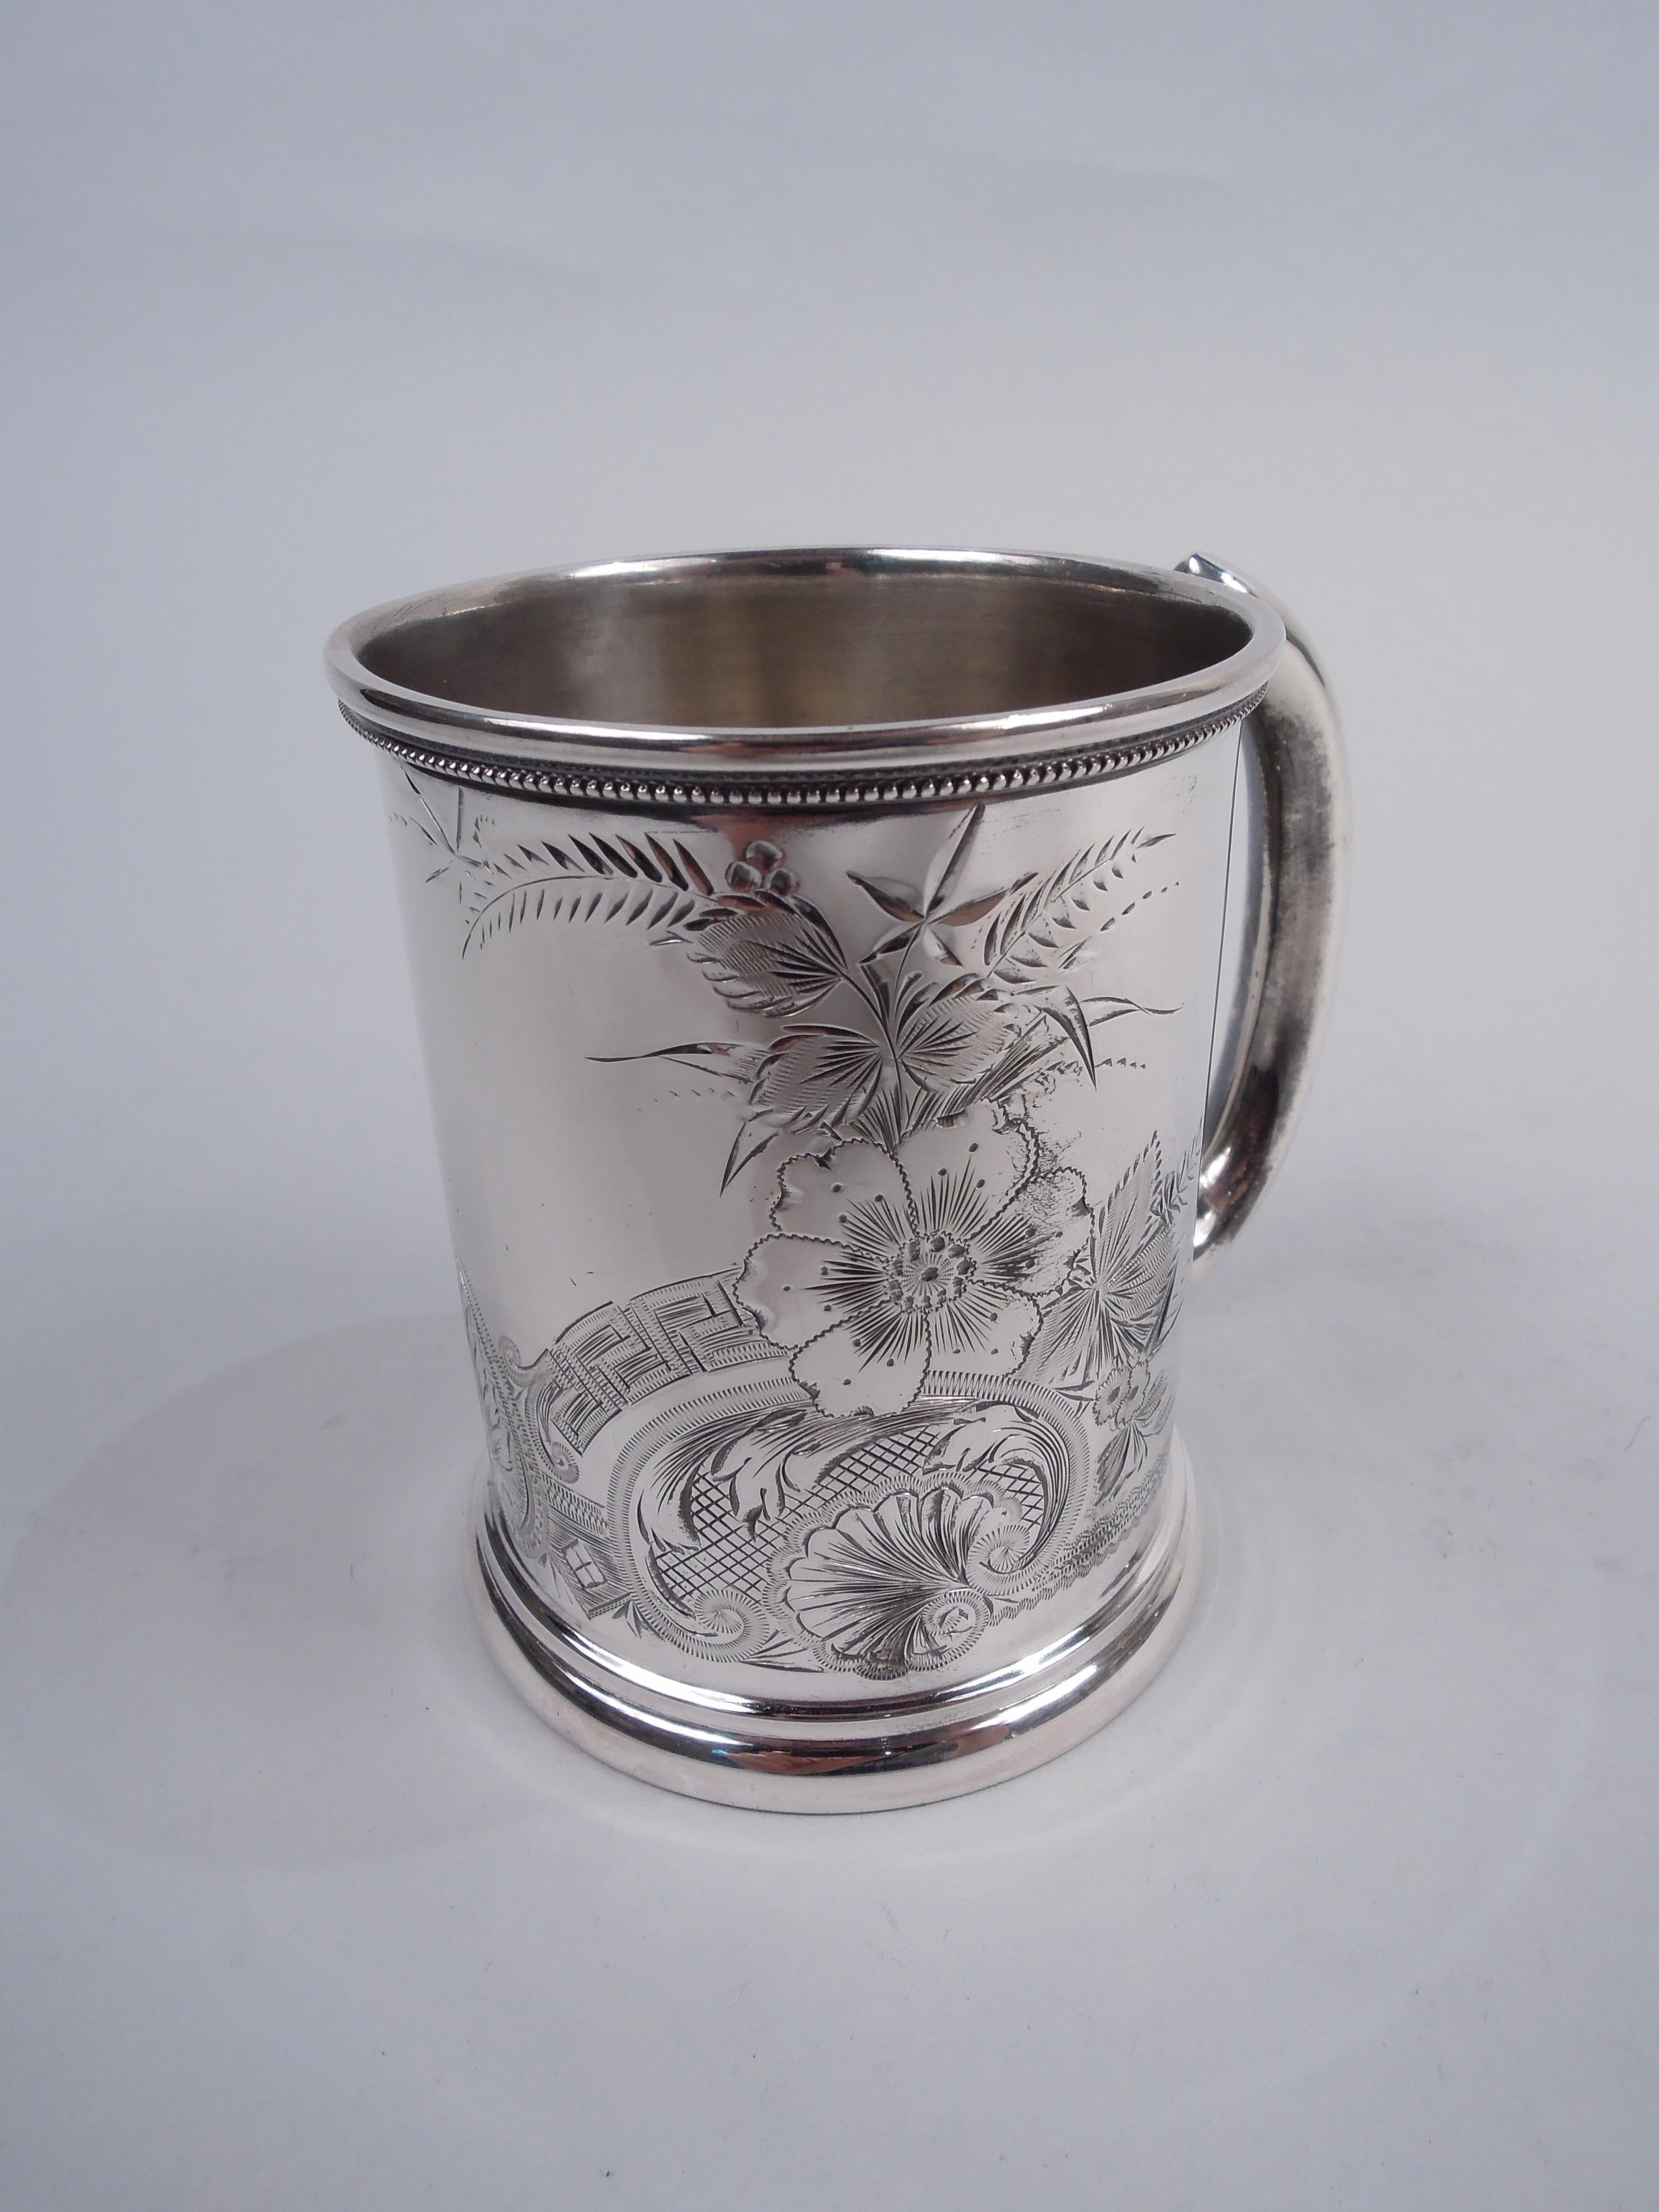 American Aesthetic Classical sterling silver baby cup, ca 1870. Straight sides with c-scroll handle and stepped spread foot. Engraved flowers and leafing scrolls amidst palmette, scallop shell, Greek Key, and diaper. Beaded, pointille, and wavy